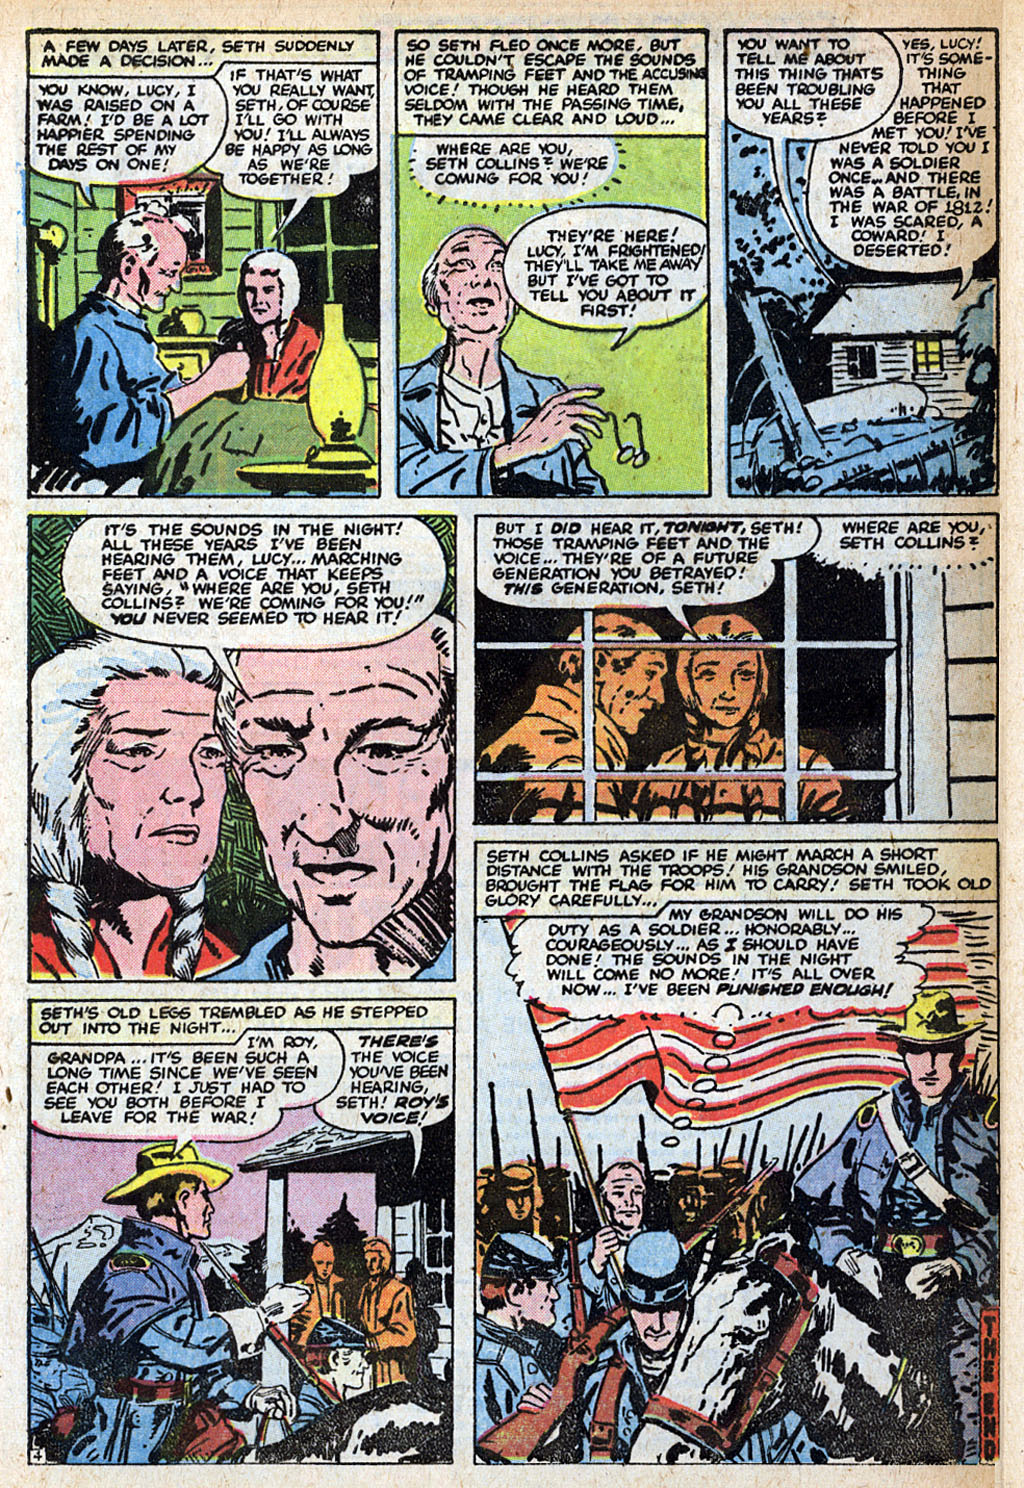 Marvel Tales (1949) 156 Page 27